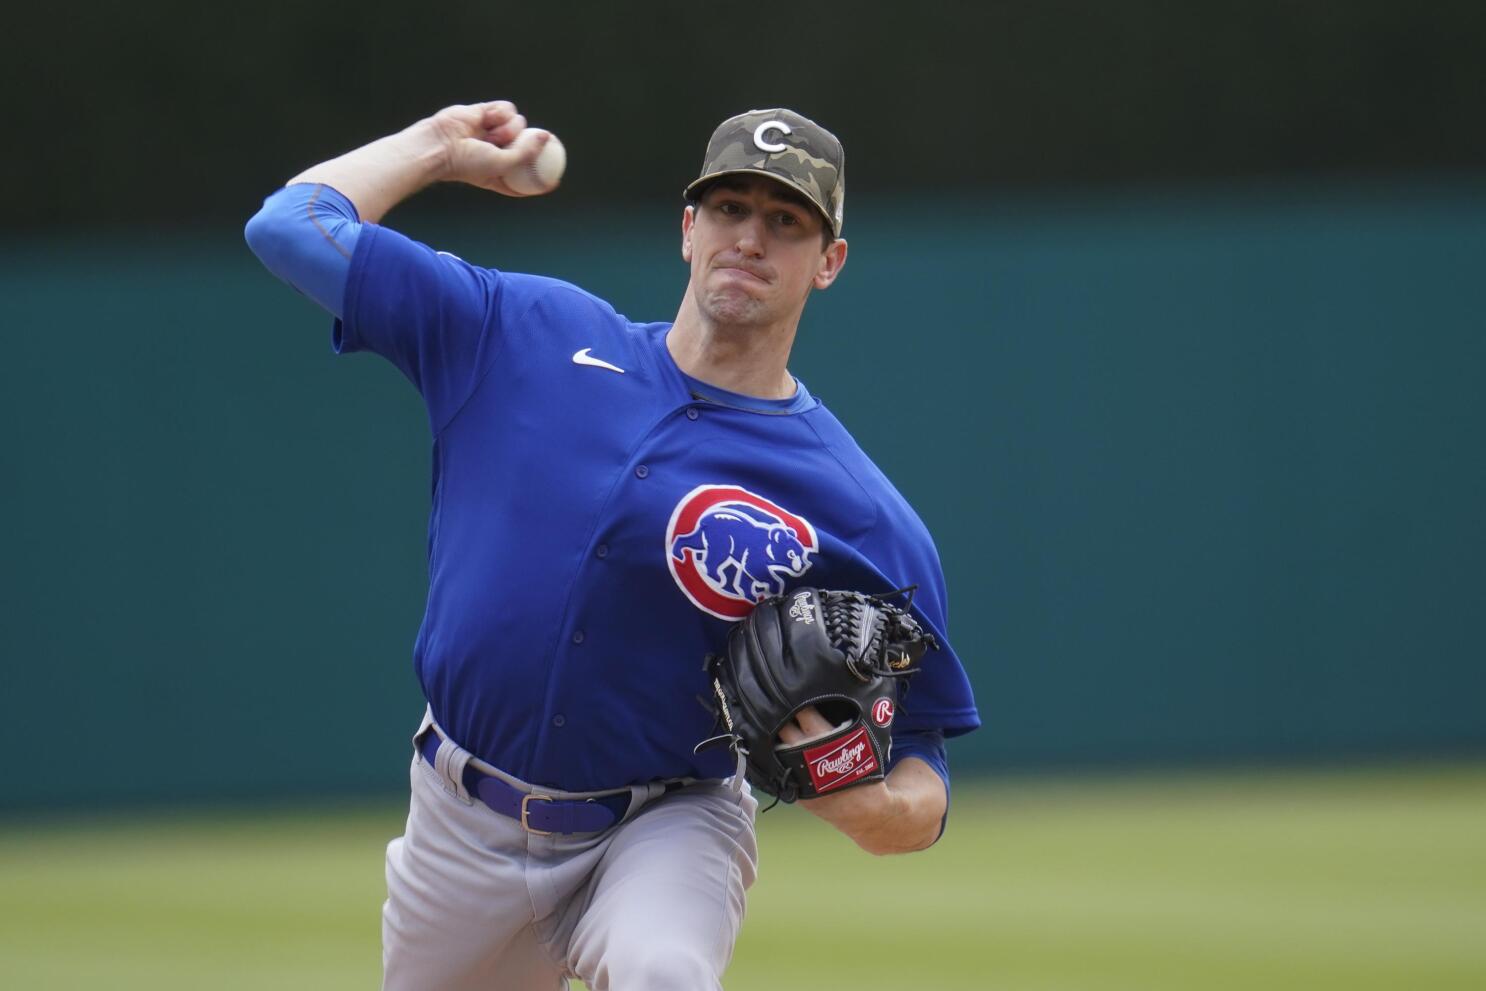 The Value in Keeping Kyle Hendricks Even if the Cubs Become